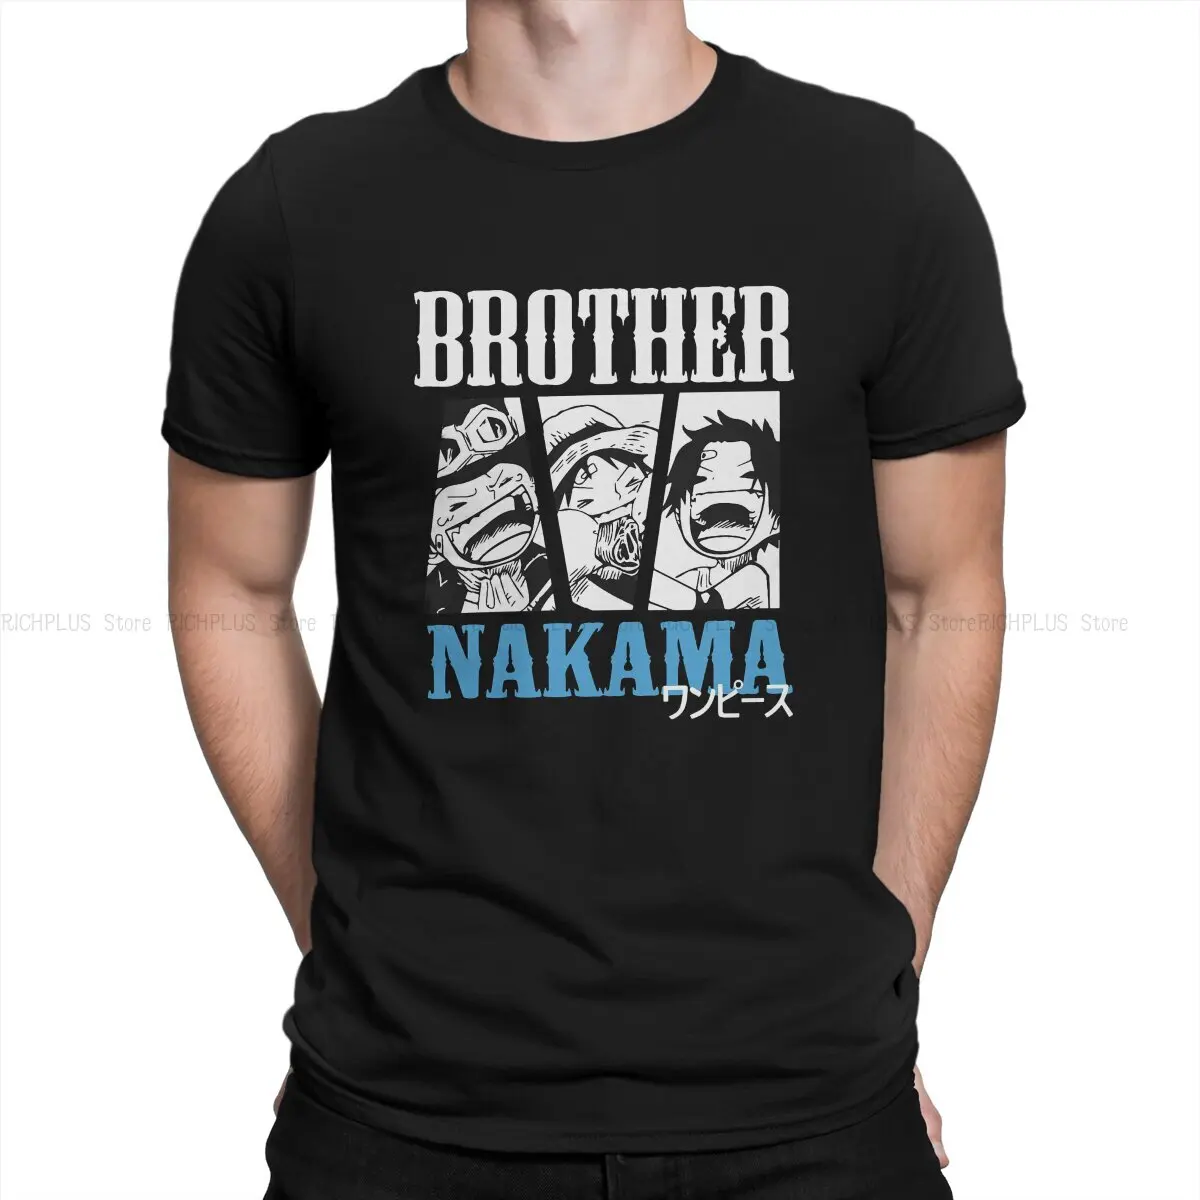 

Brother Nakama Special TShirt One Piece Anime Leisure T Shirt Summer Stuff For Adult